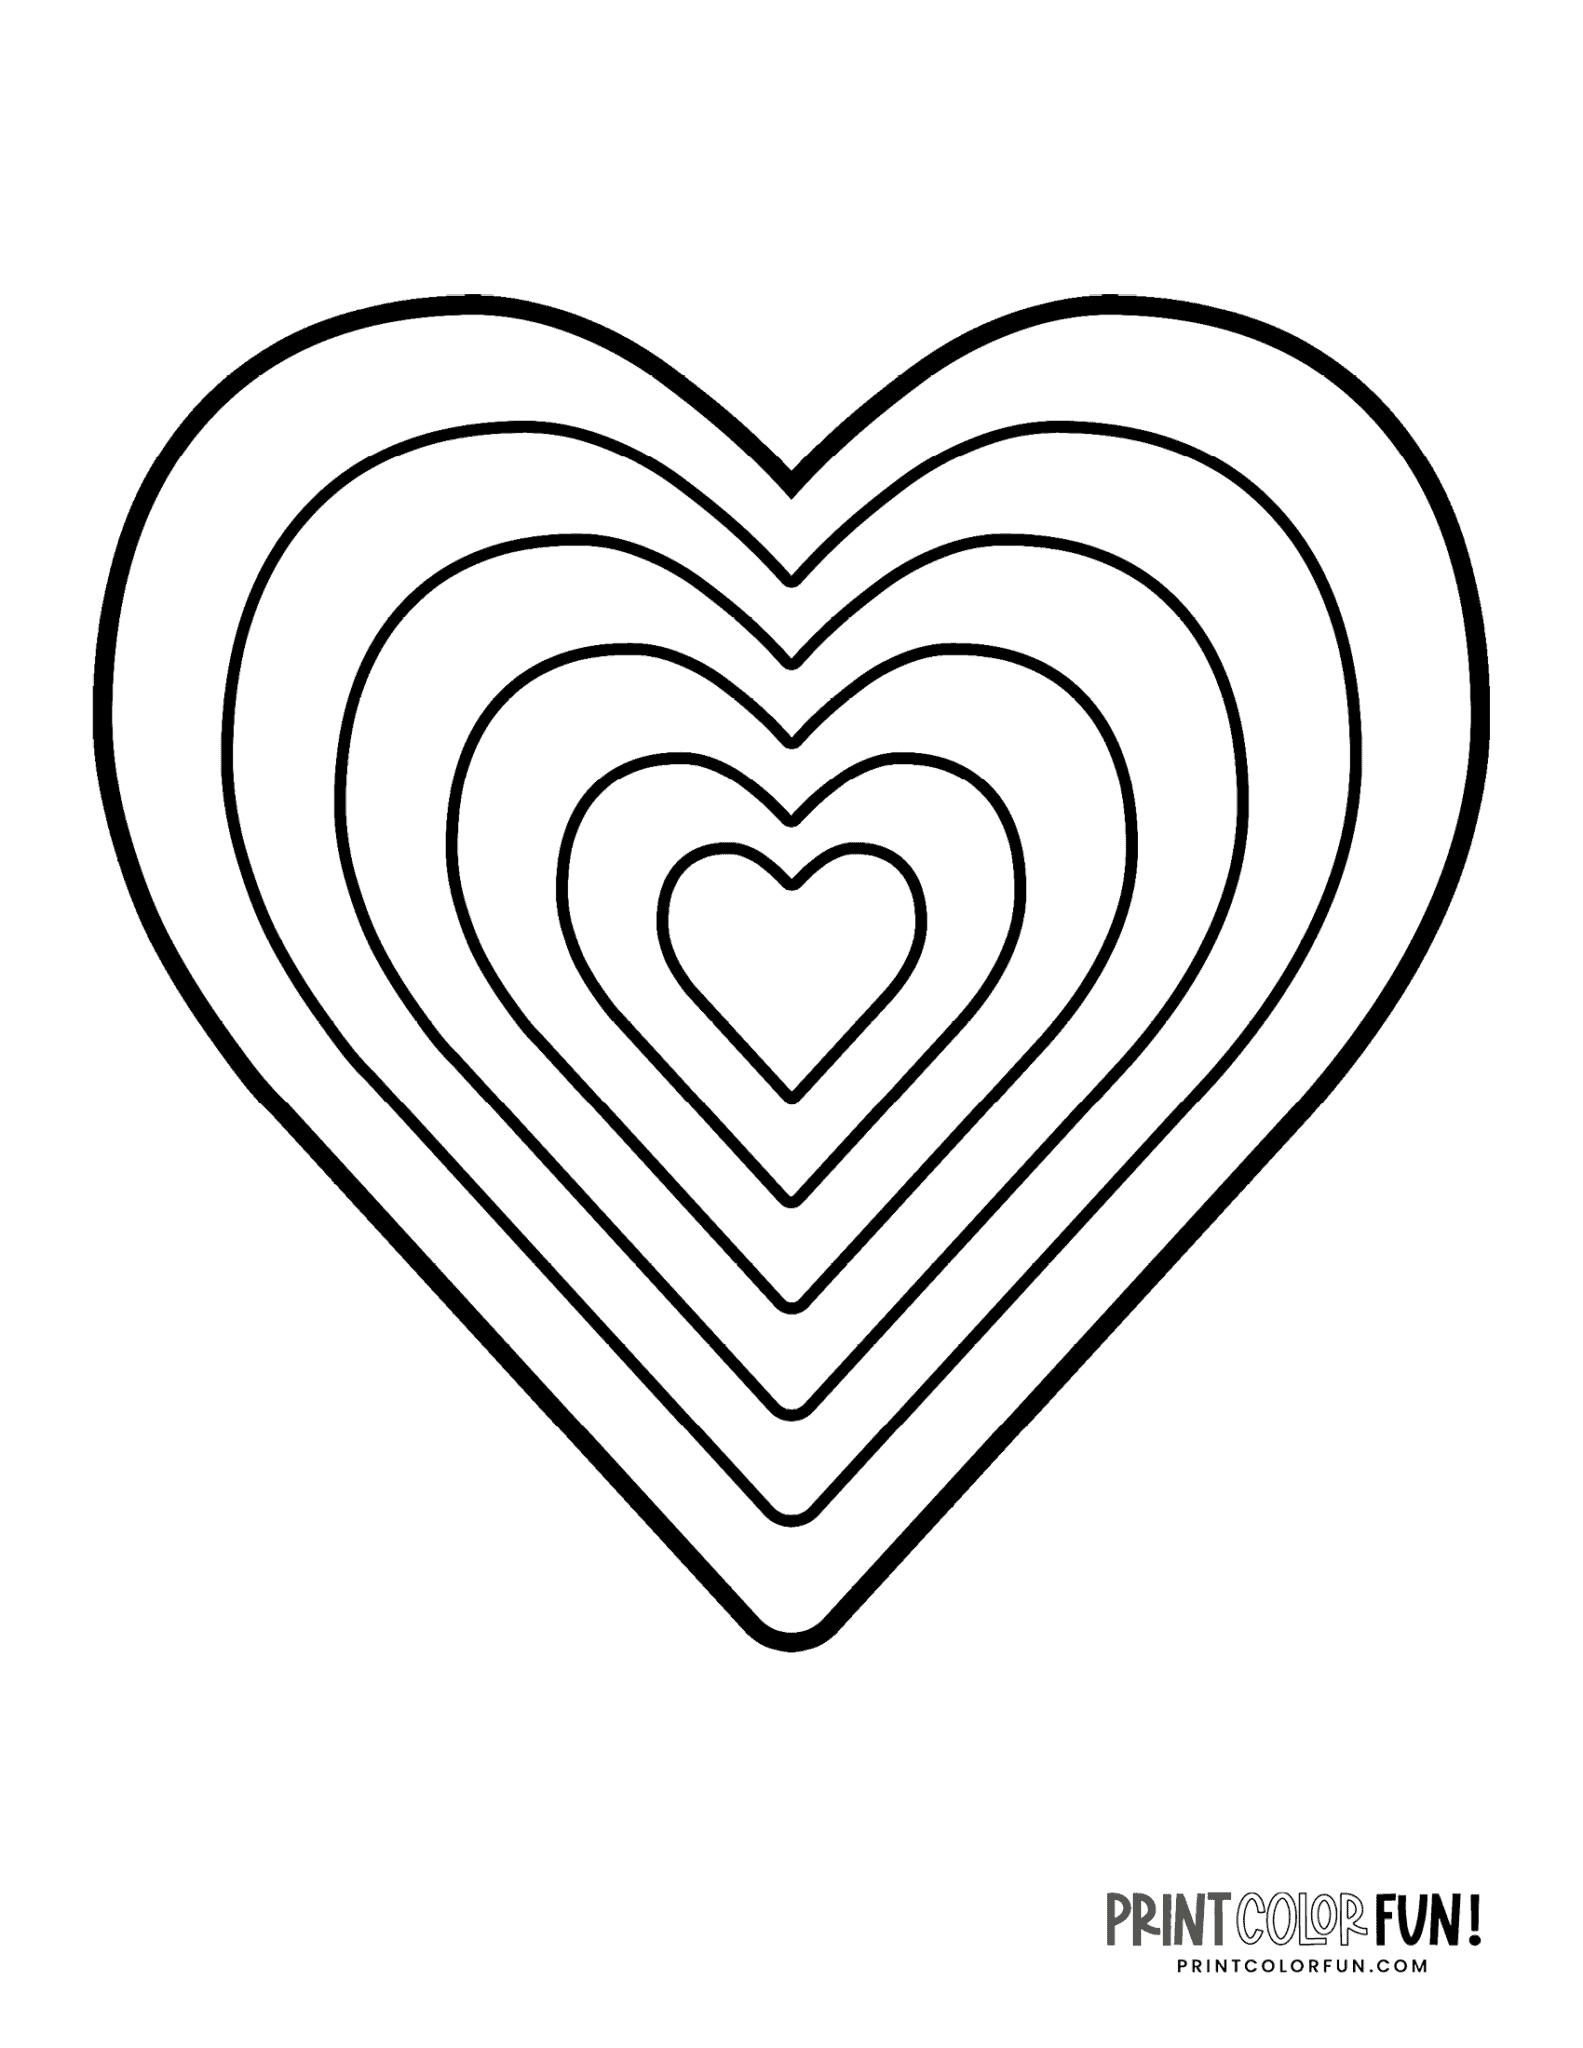 printable heart pictures